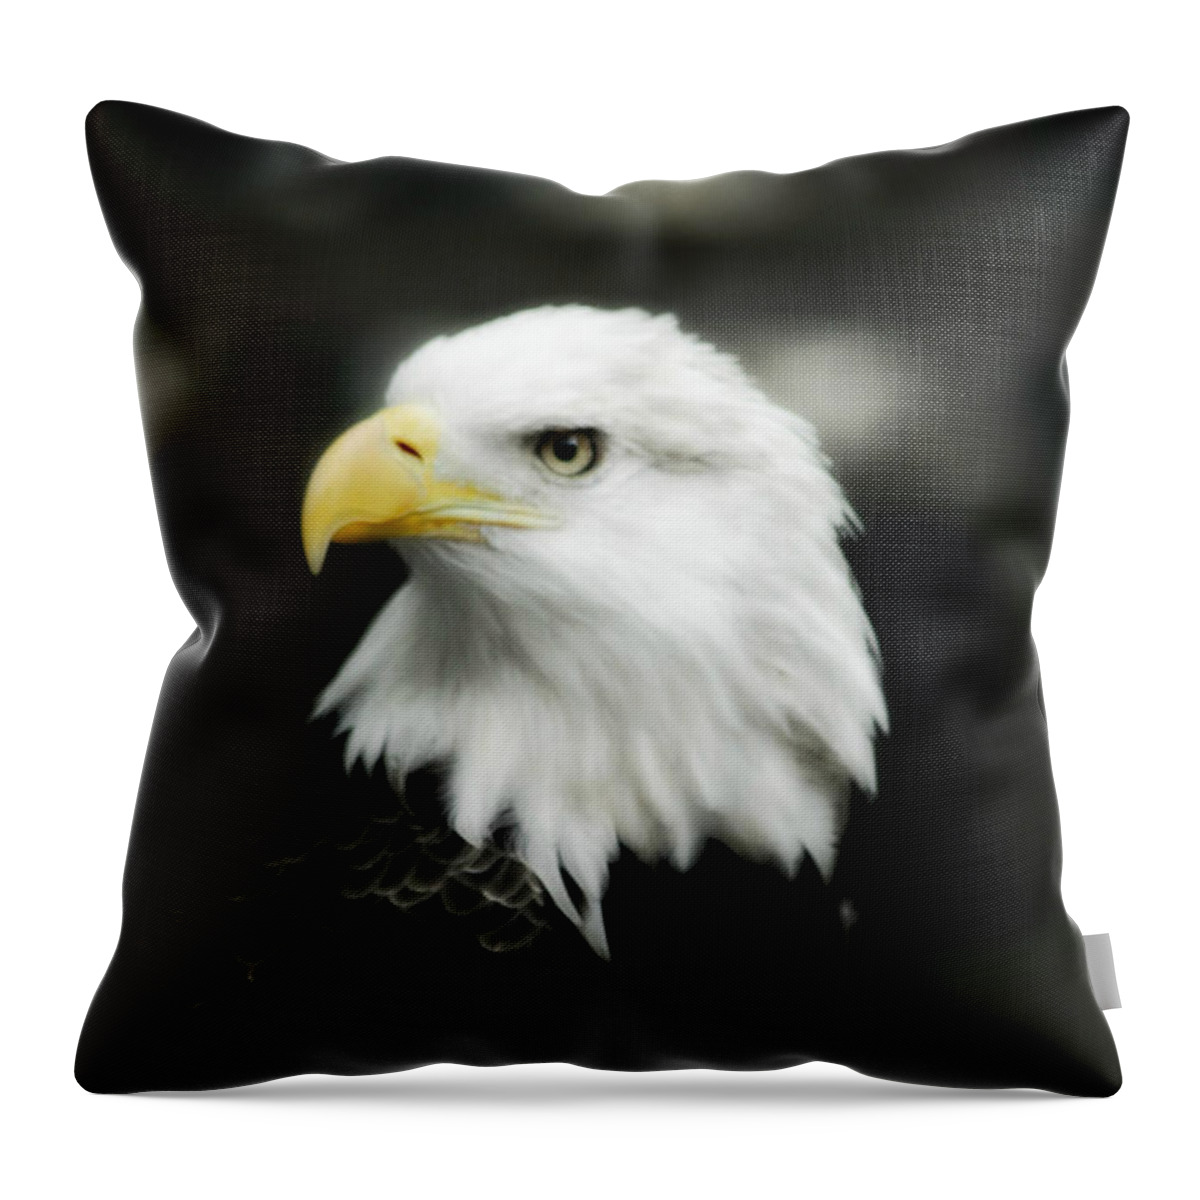 Bald Eagle Throw Pillow featuring the photograph Bald Eagle by Peggy Franz